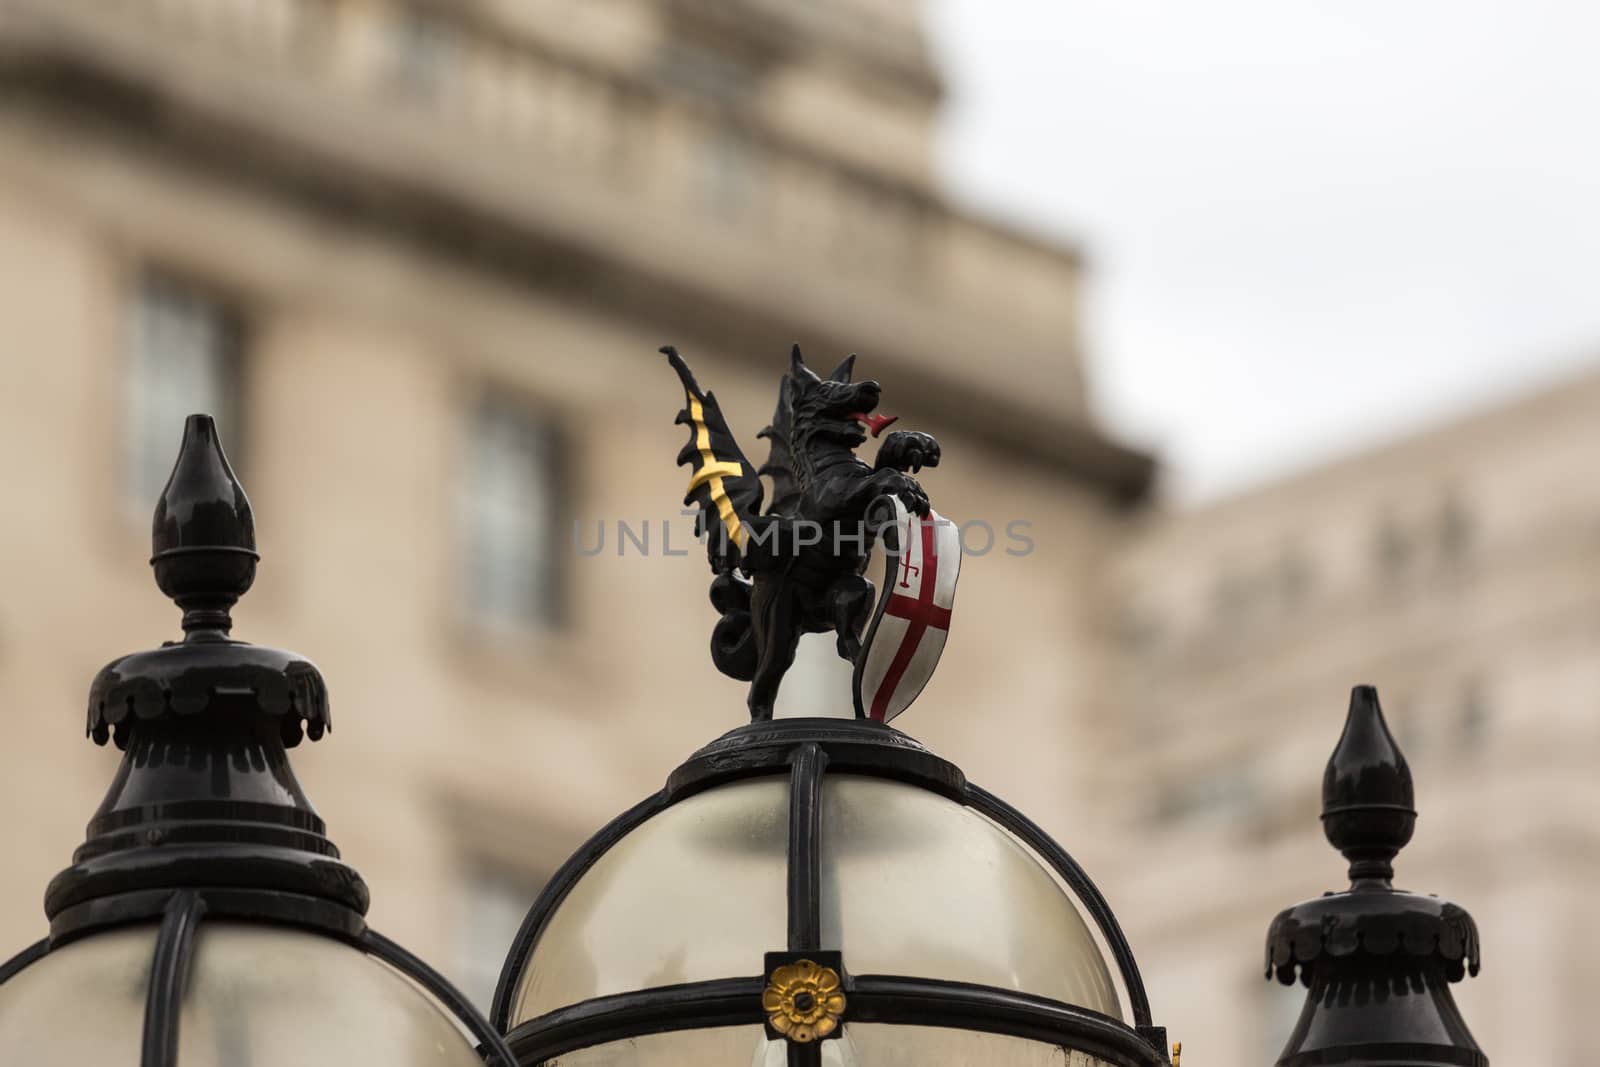 The old City of London Street Lights near the Bank of England